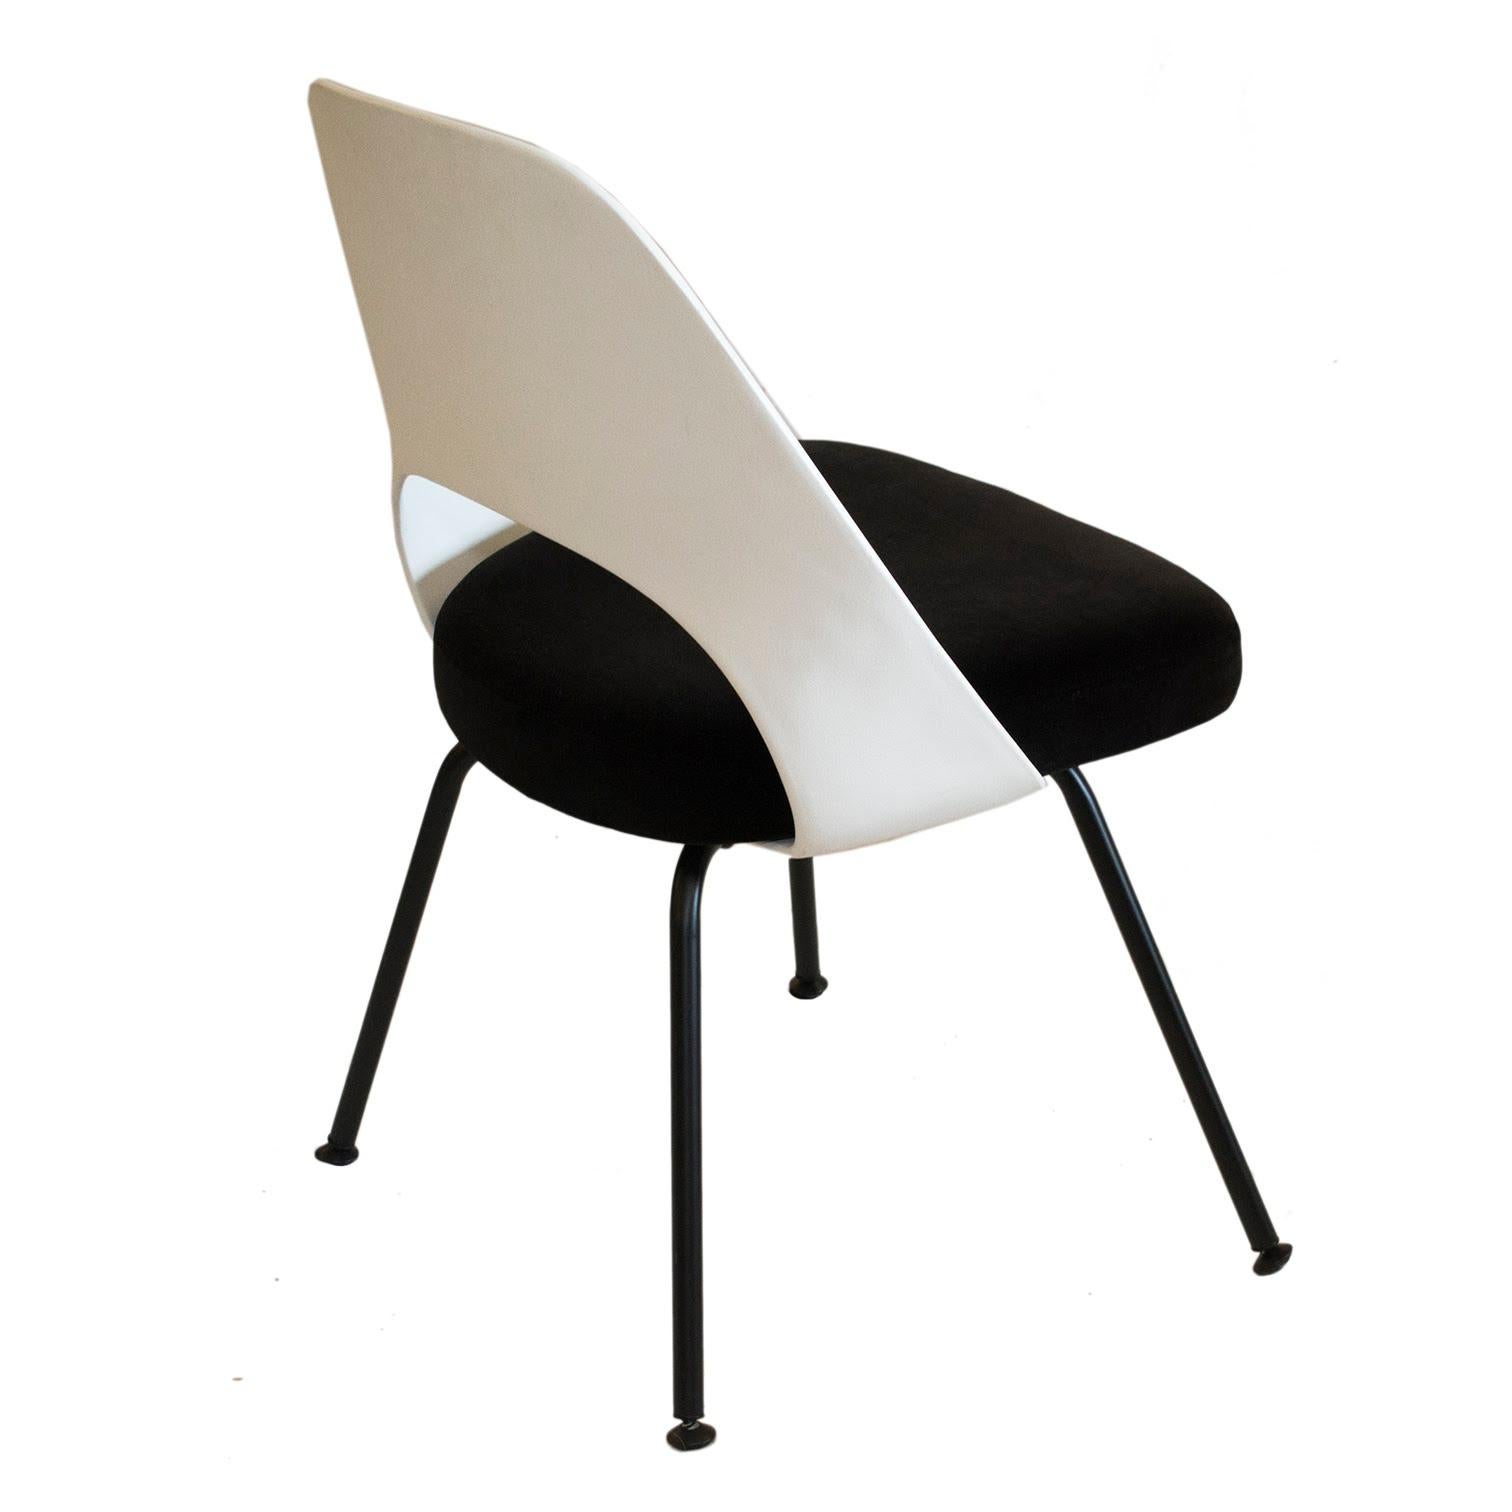 Knoll Armless Saarinen Chair with Black Velvet Seat In Excellent Condition For Sale In Wilton, CT